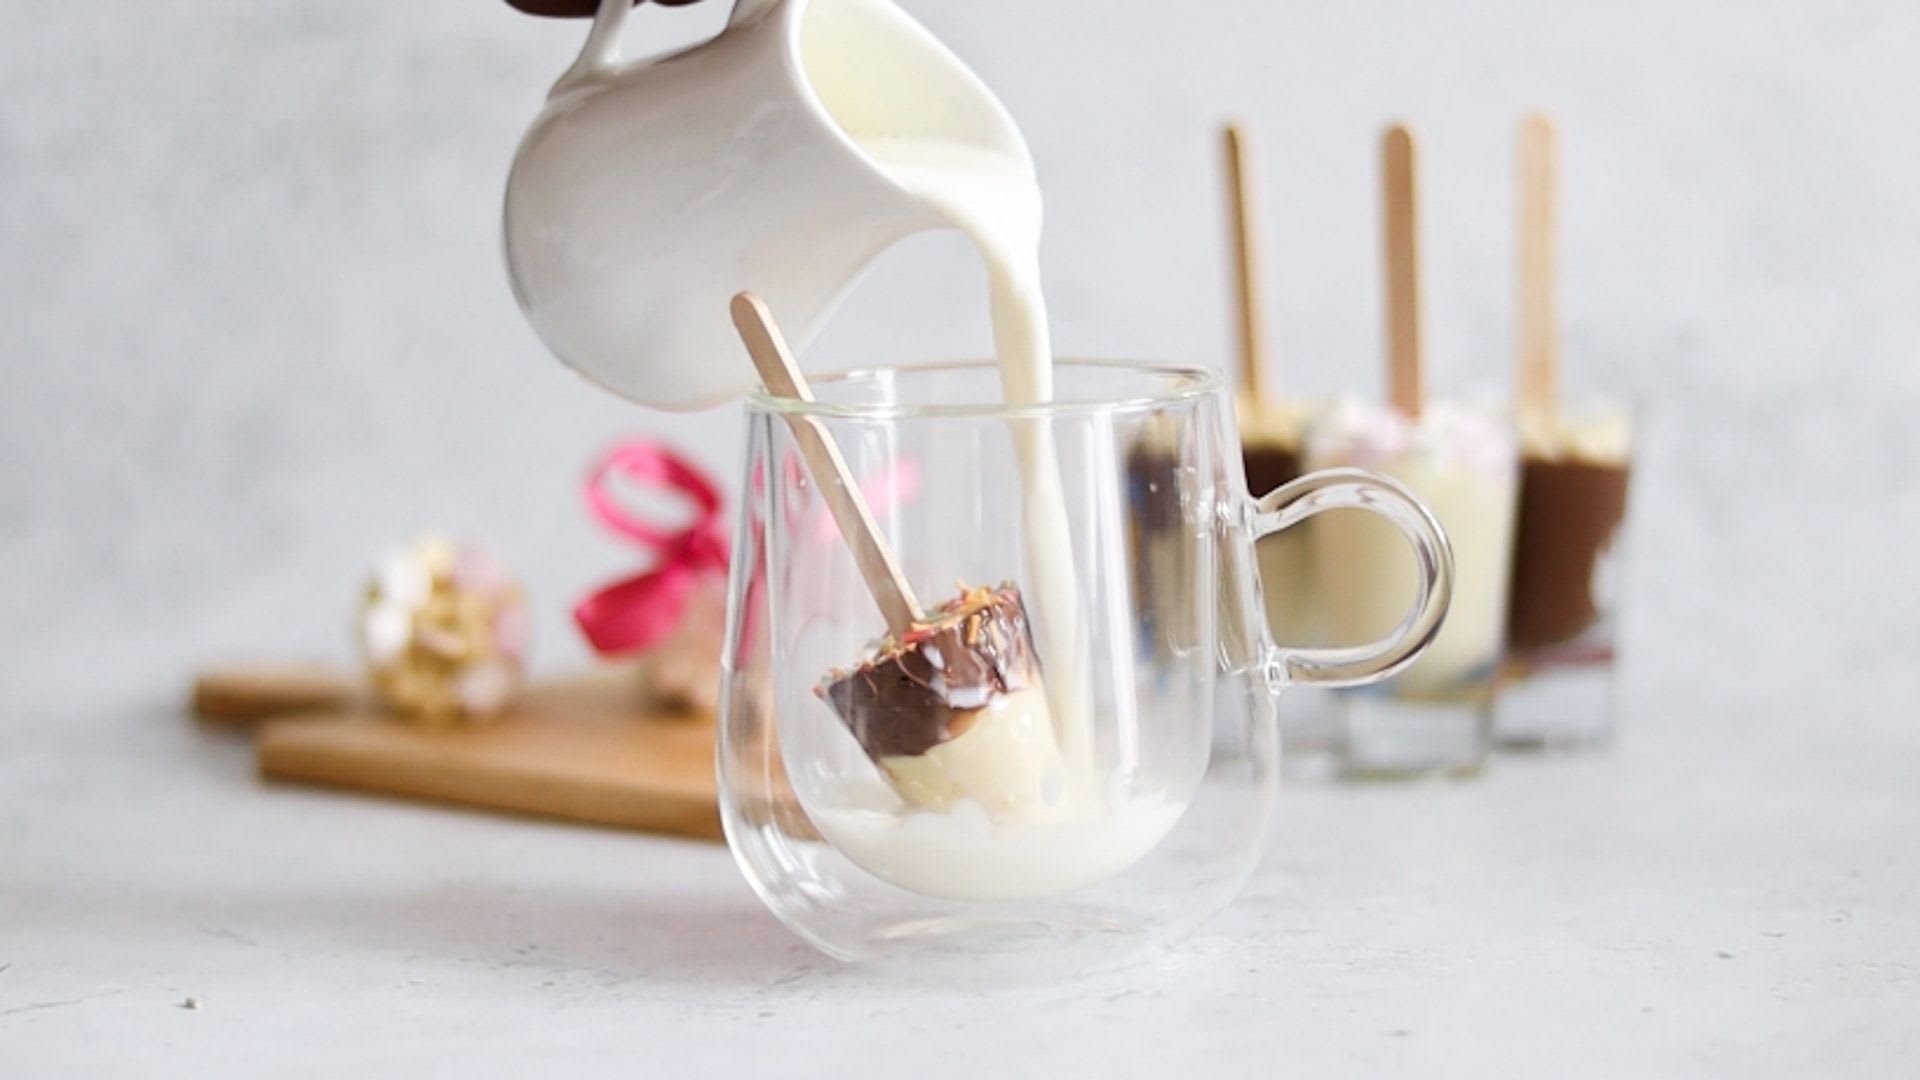 Hot Chocolate Stirrers Recipe - A Winter Drink Must Have!